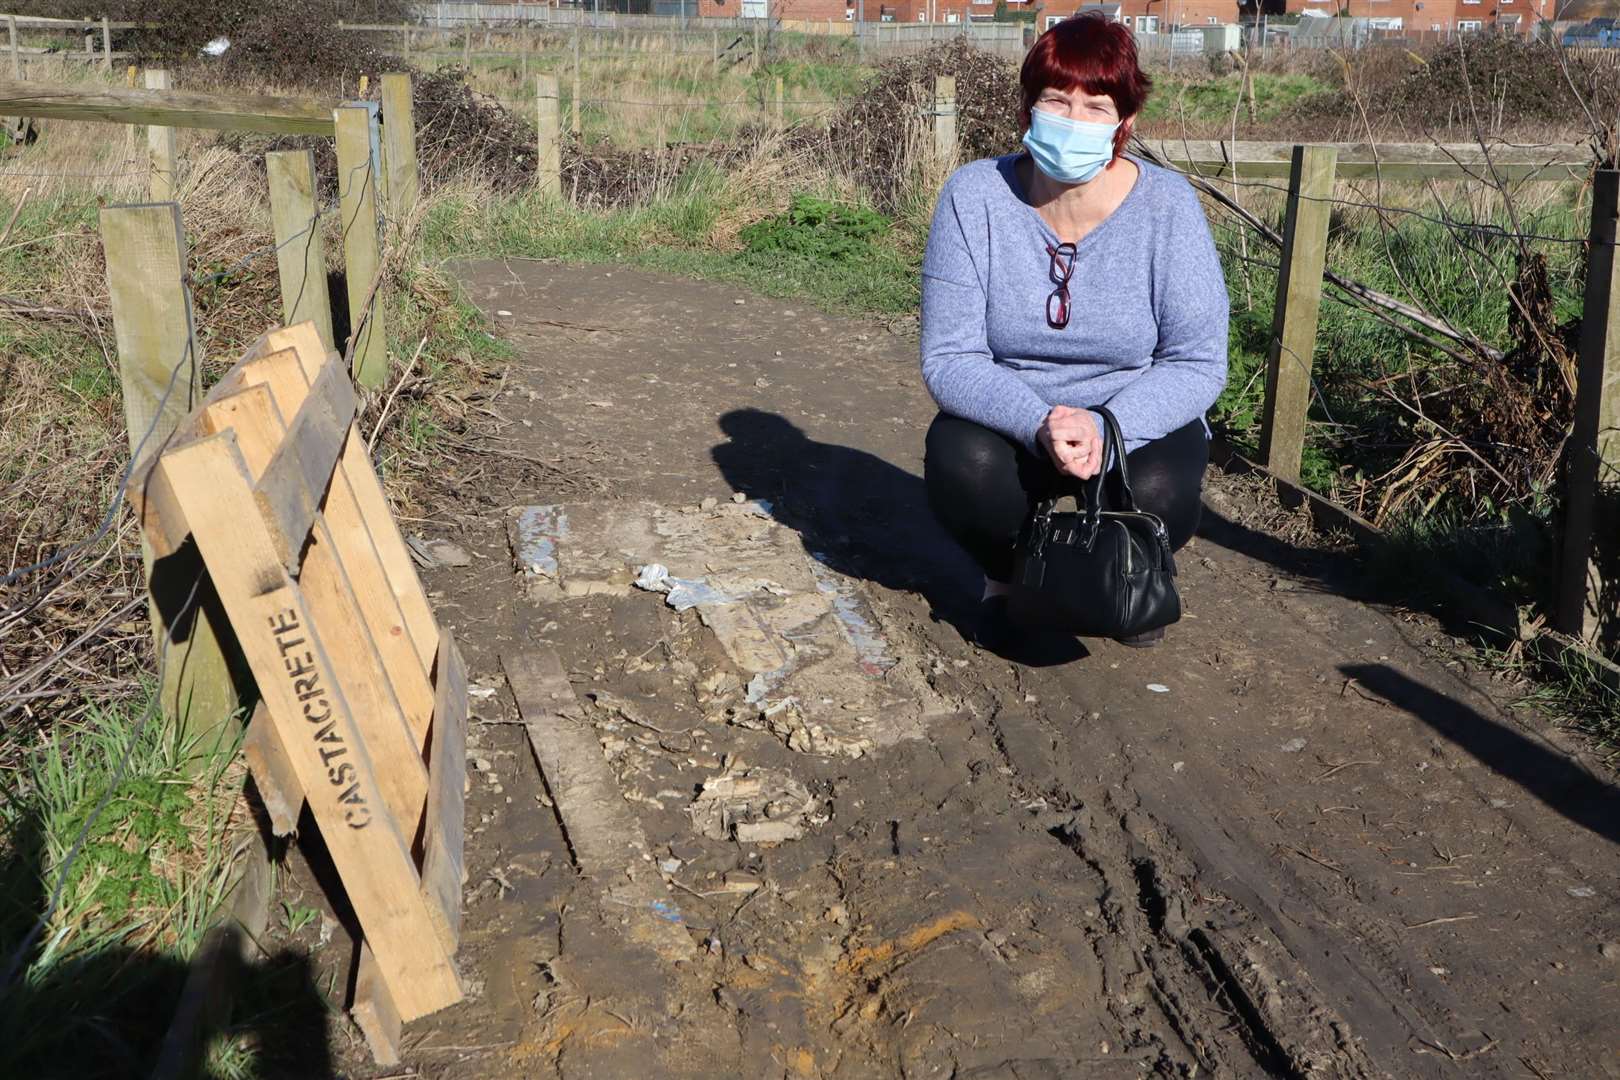 Shirley Young at the muddy track at Neats Court retail park, Queenborough, which becomes impassable after rain. It is section C on the map